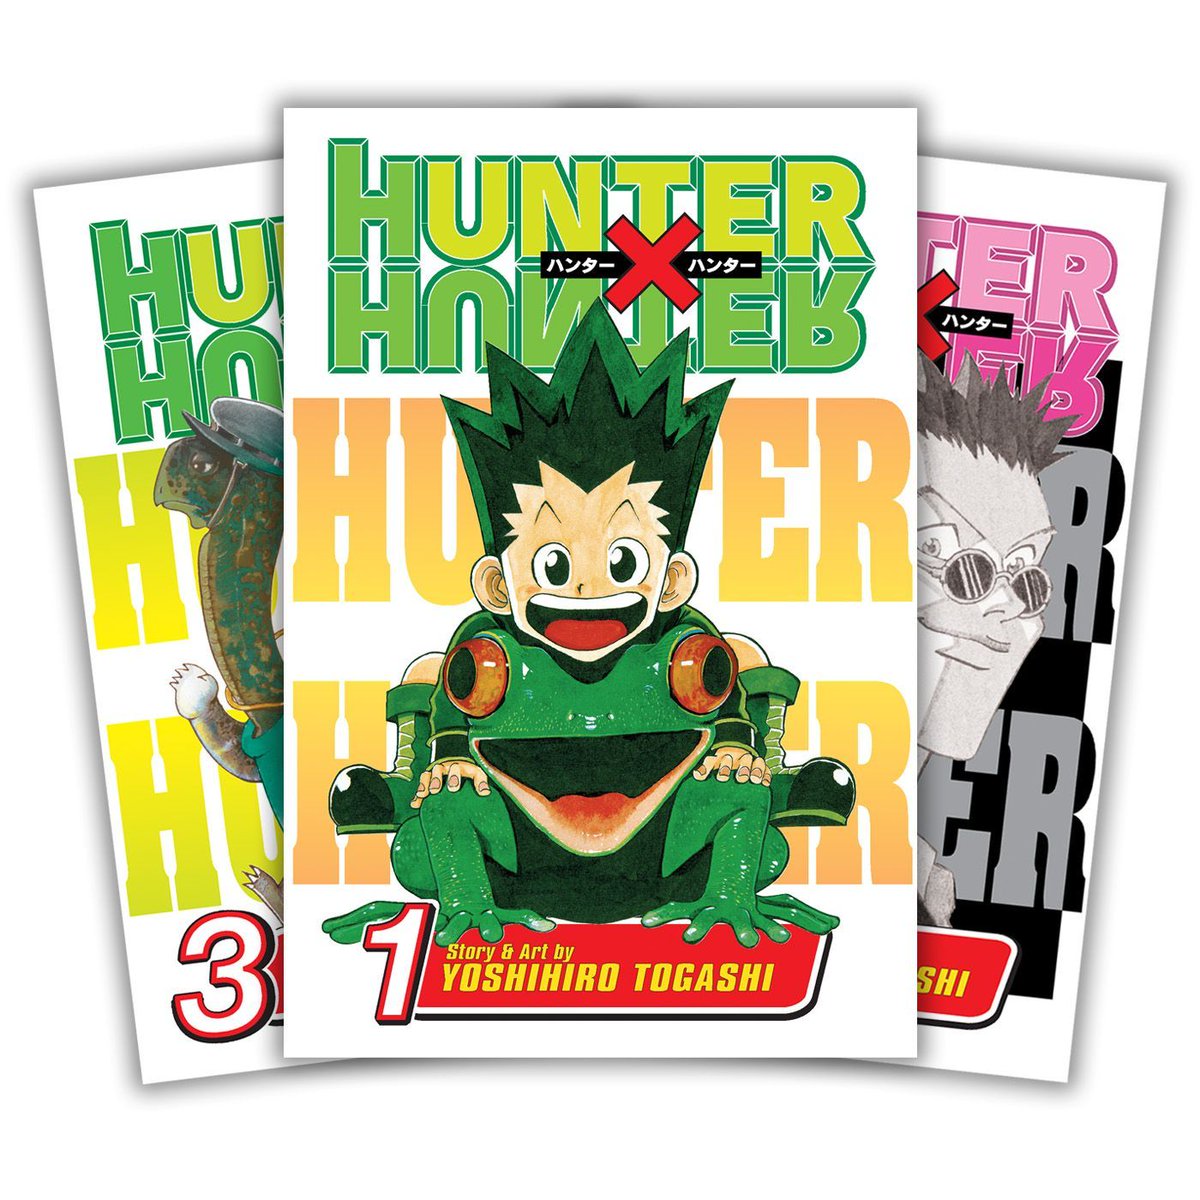 Announcement: Gon's quest to find his father leads him on a journey to take the Hunter Exam! Start your collection with the new Hunter x Hunter 3-in-1s, by Yoshihiro Togashi, releasing Spring 2025.